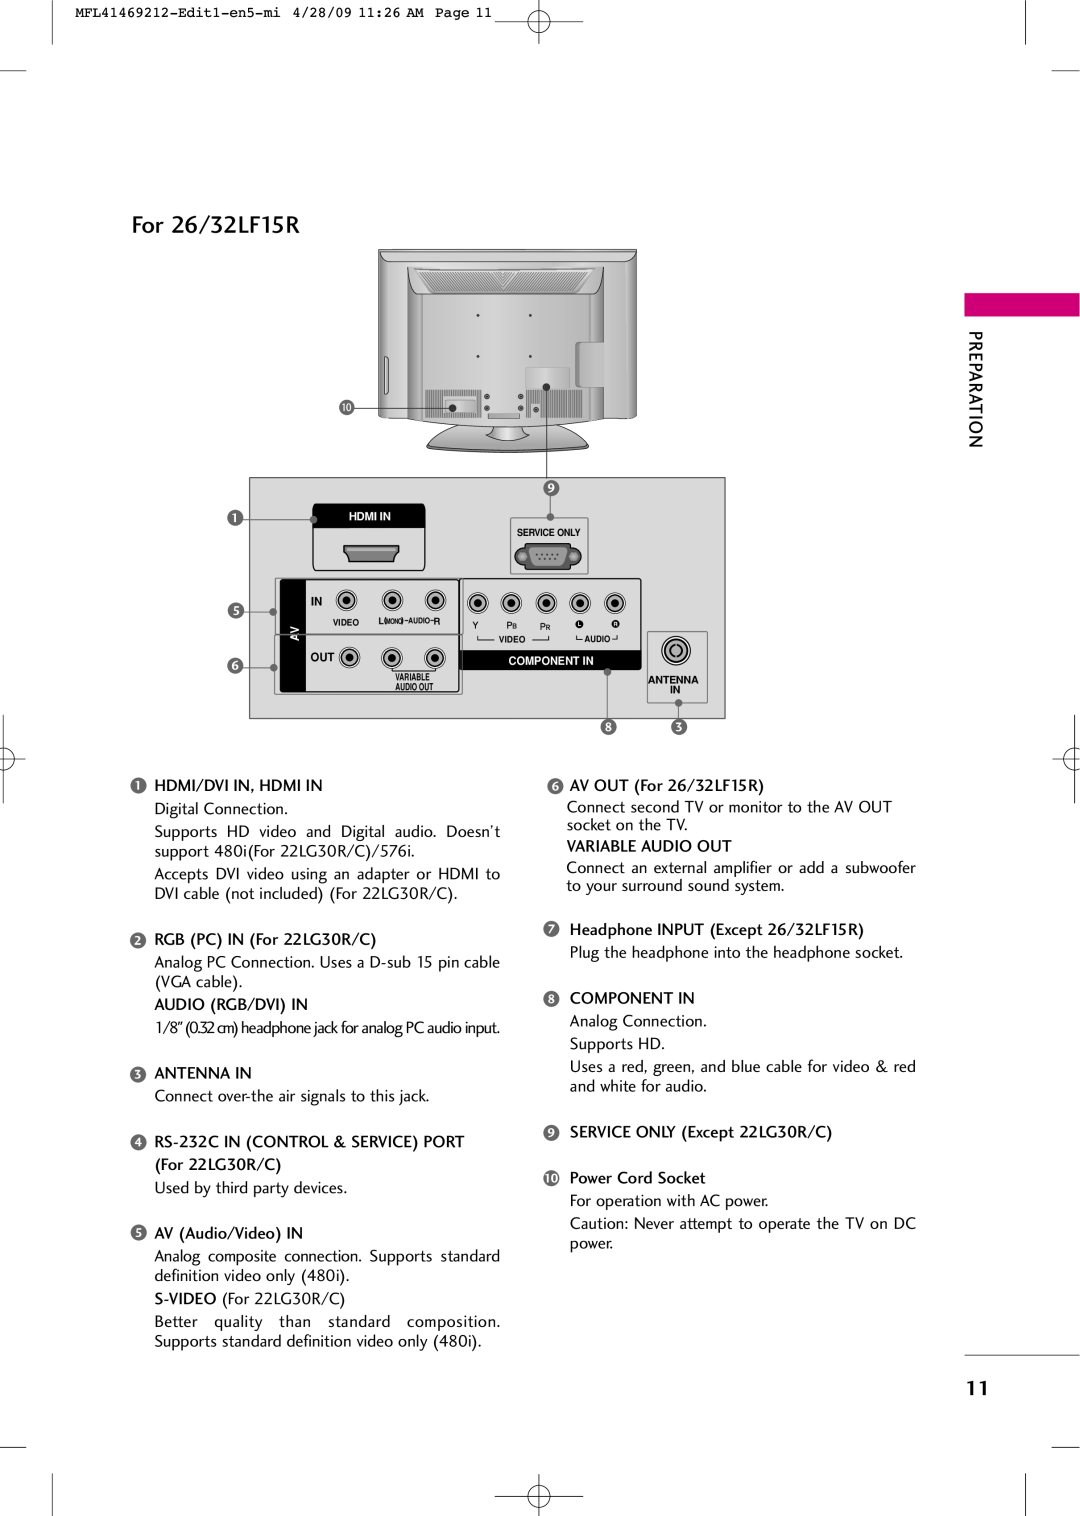 LG Electronics 2230R-MA manual For 26/32LF15R, HDMI/DVI IN, HDMI IN Digital Connection 